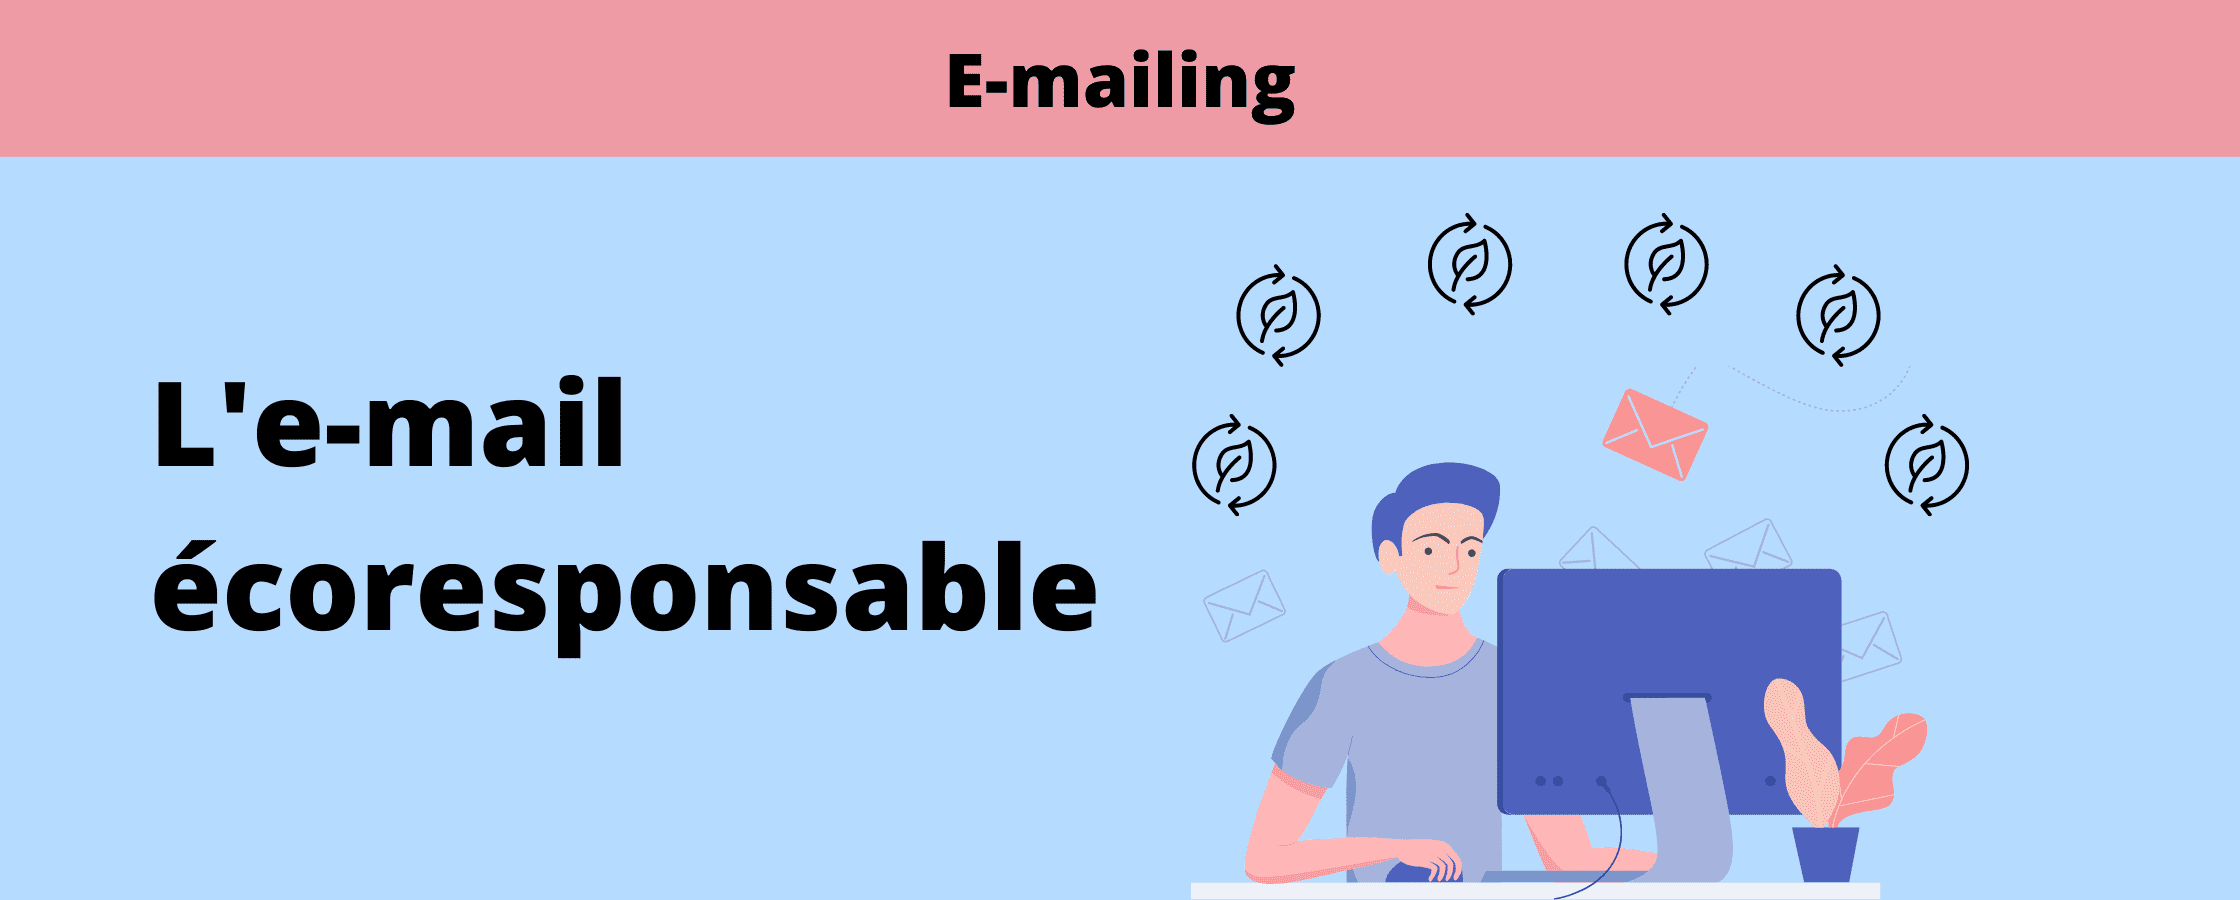 email-ecoresponsable